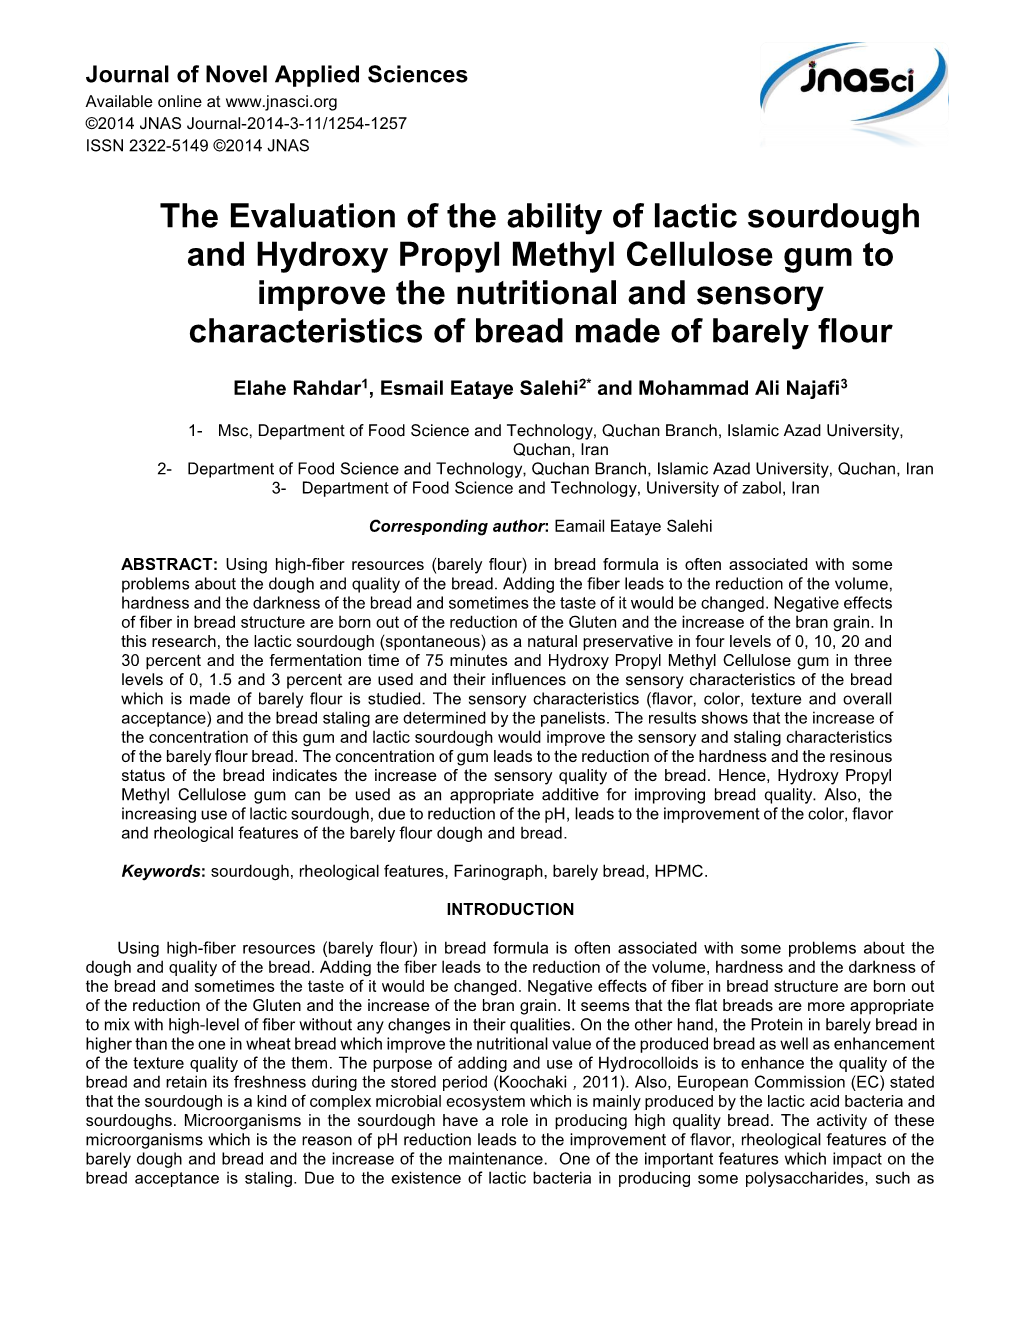 The Evaluation of the Ability of Lactic Sourdough and Hydroxy Propyl